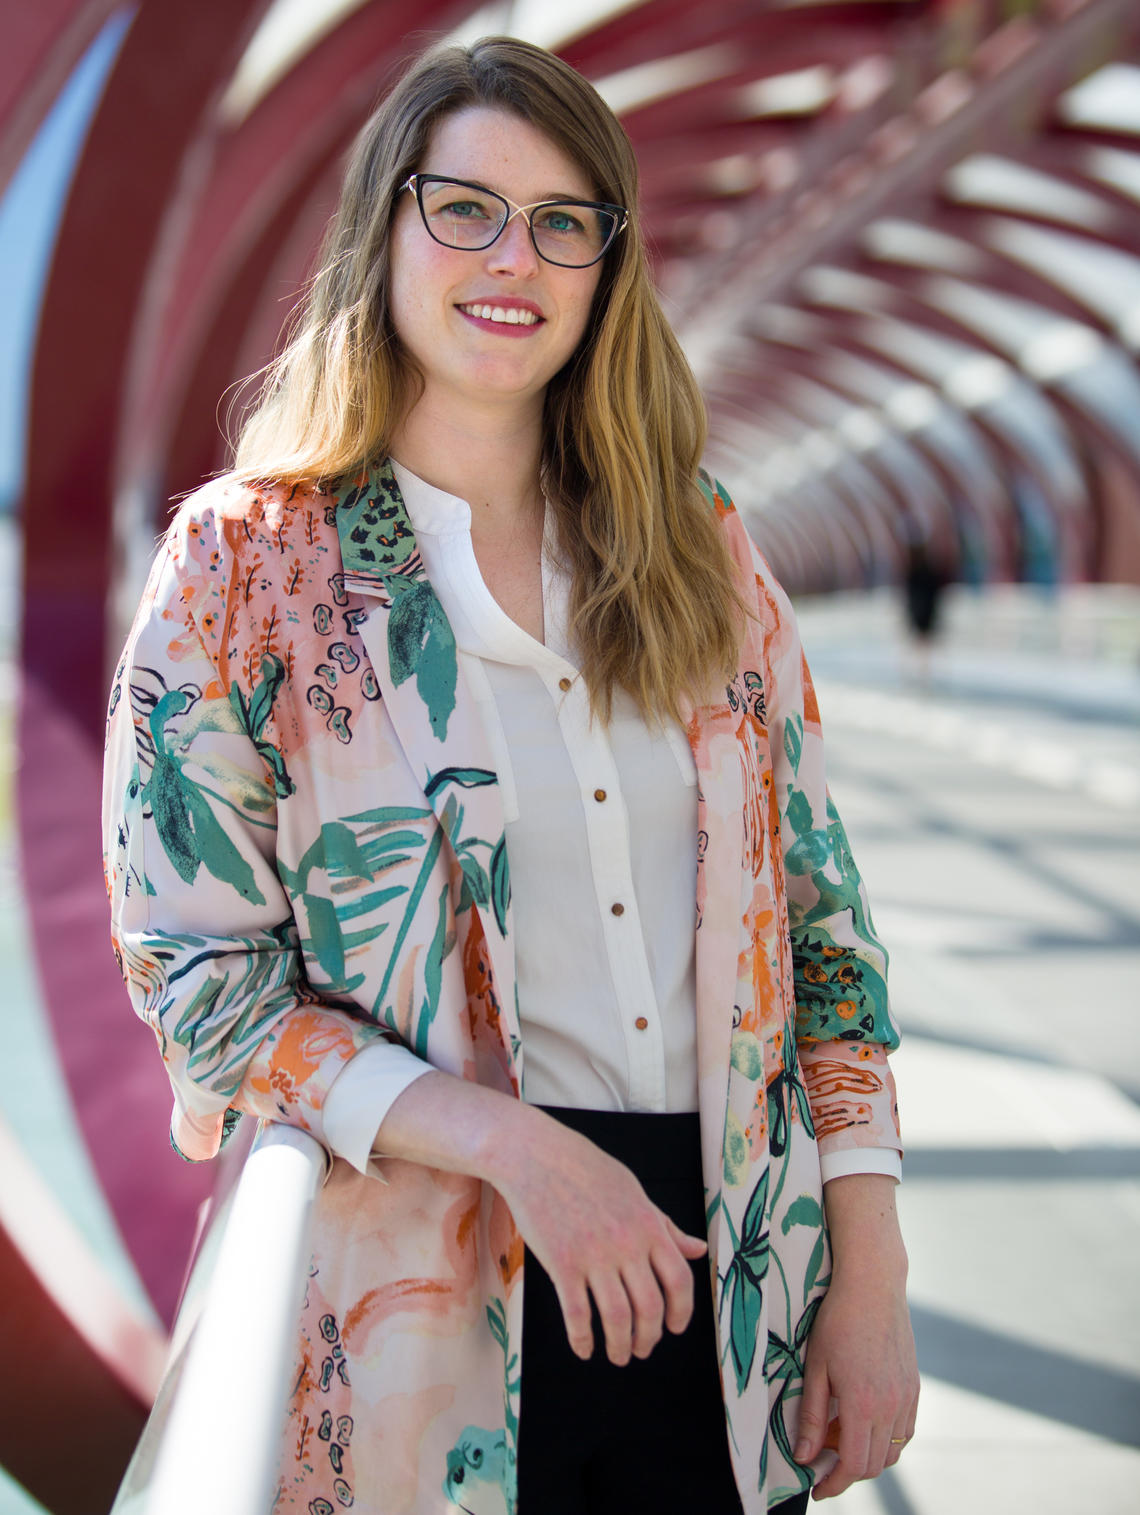 Eleanor Carlson, a lawyer with Carbert Waite LLP, was a law student and the Calgary co-ordinator for Pro Bono Students Canada when the 2013 flood hit.